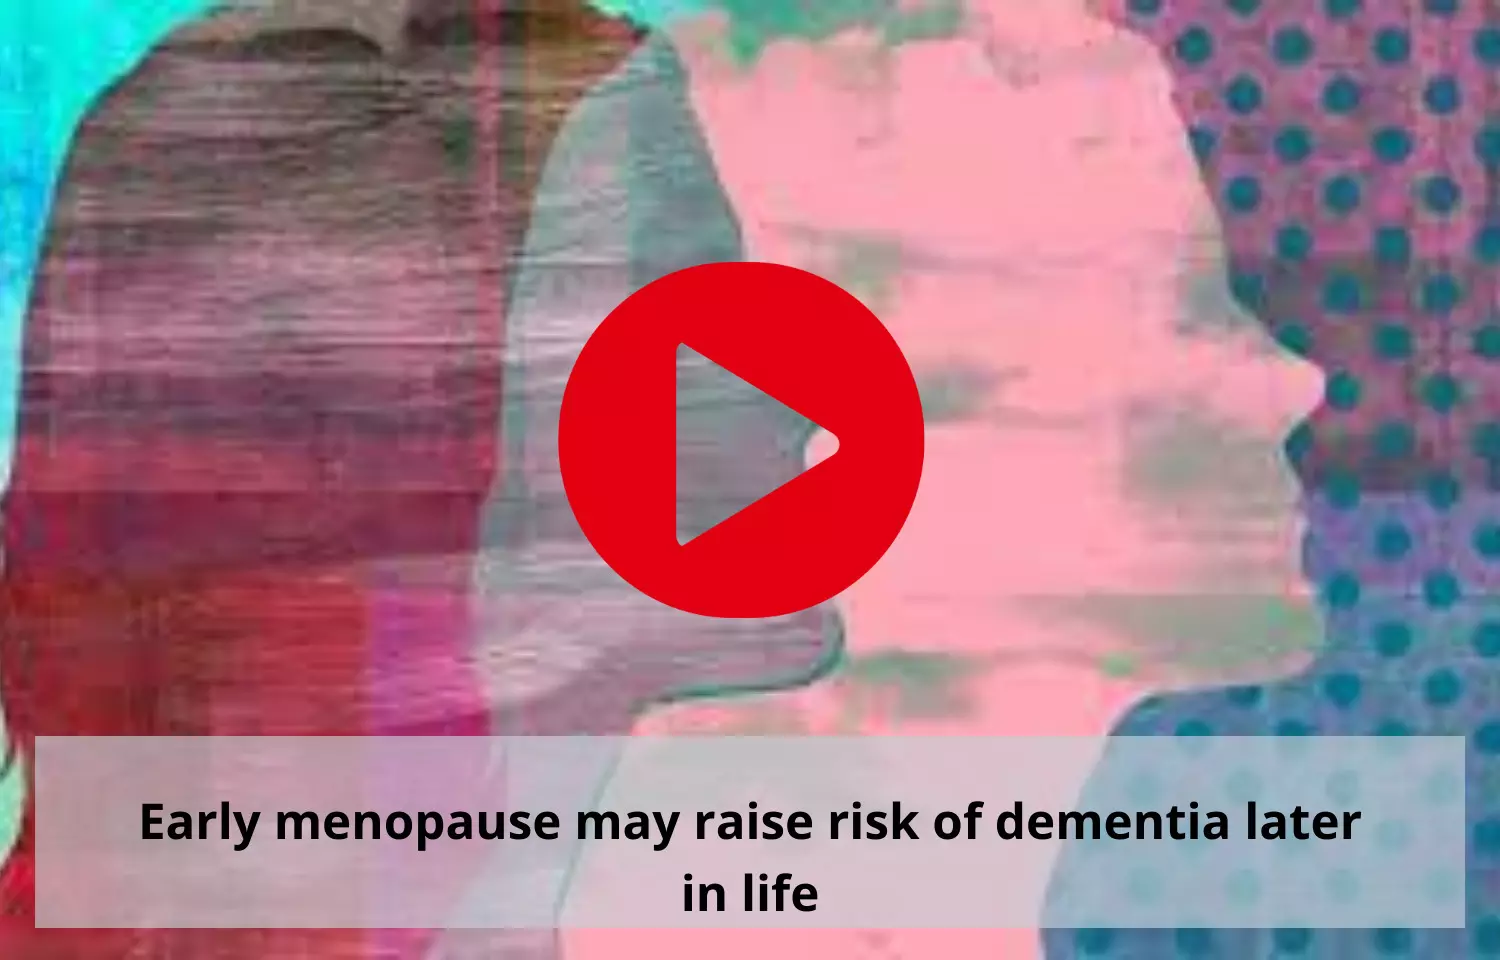 Early menopause to raise risk of dementia later in life